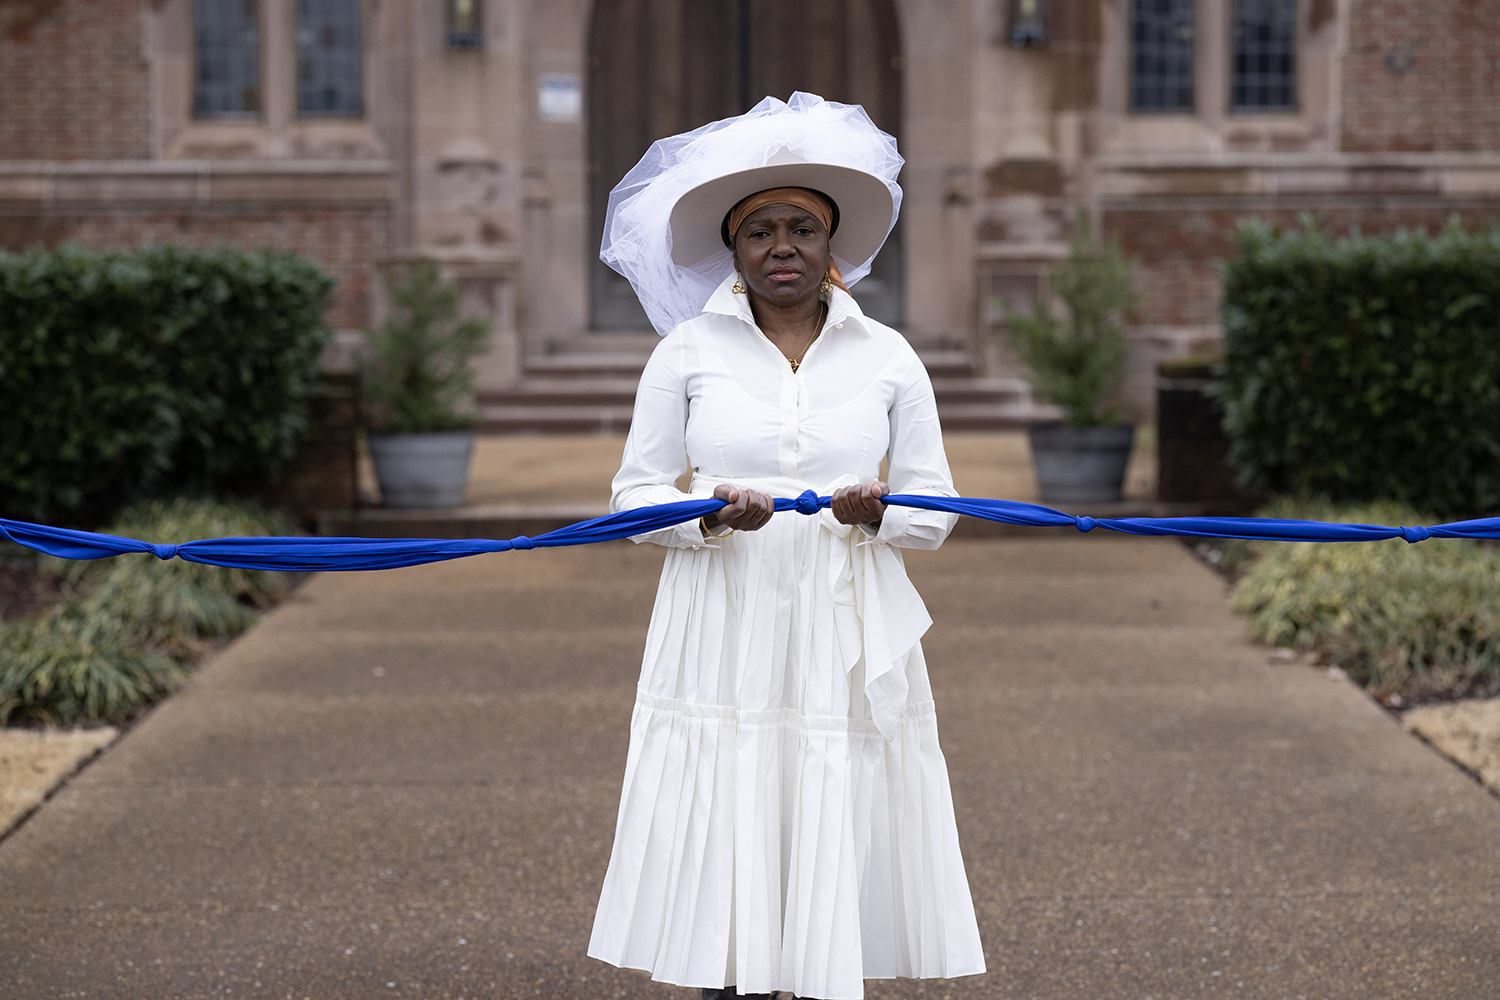 Creator of When We Gather, photographer María Magdalena Campos-Pons standing dressed in white with white hat holding a knotted blue fabric.